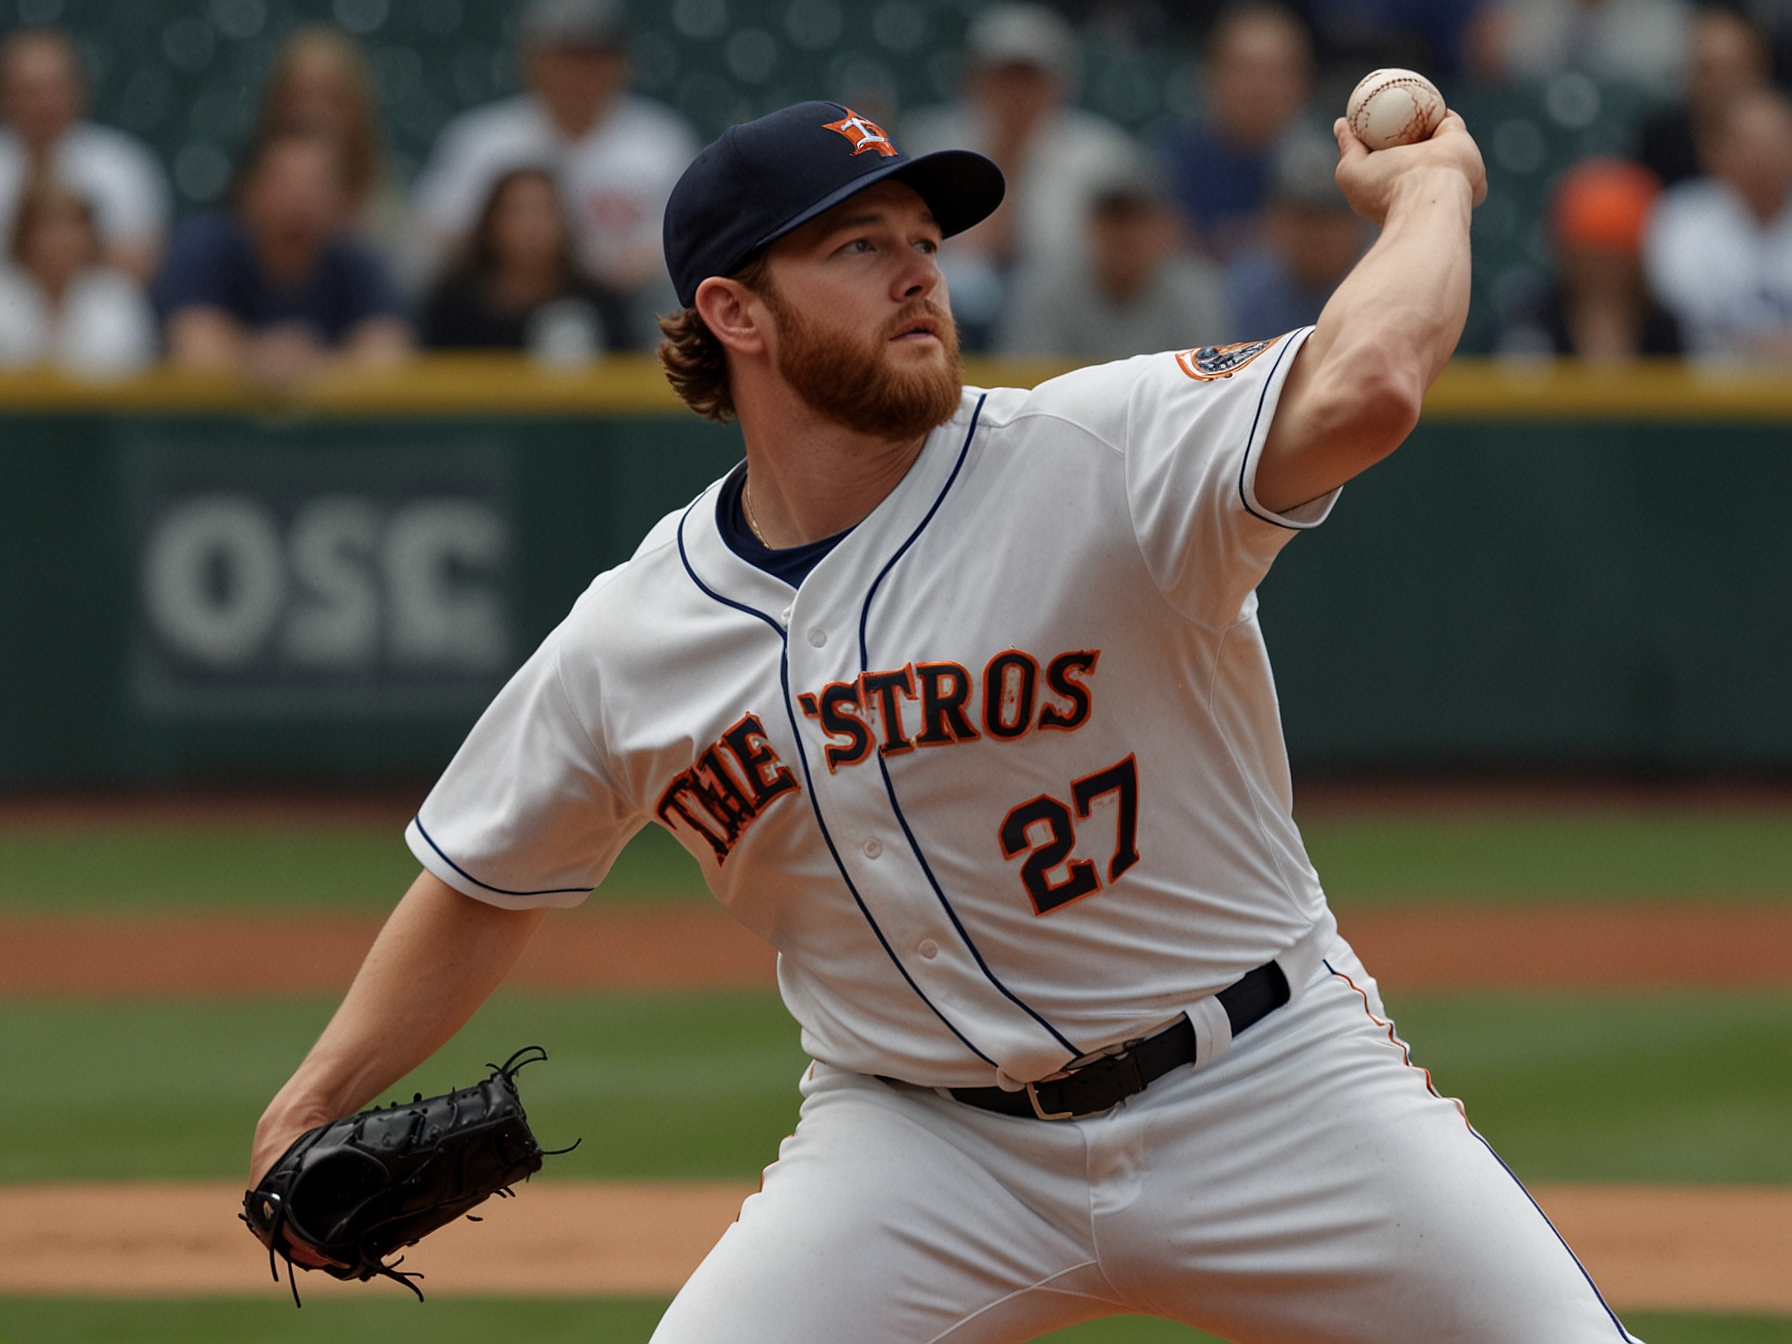 Hunter Brown delivers a powerful pitch during his six scoreless innings against the Colorado Rockies, exemplifying his dominance and solidifying the Astros' early lead.